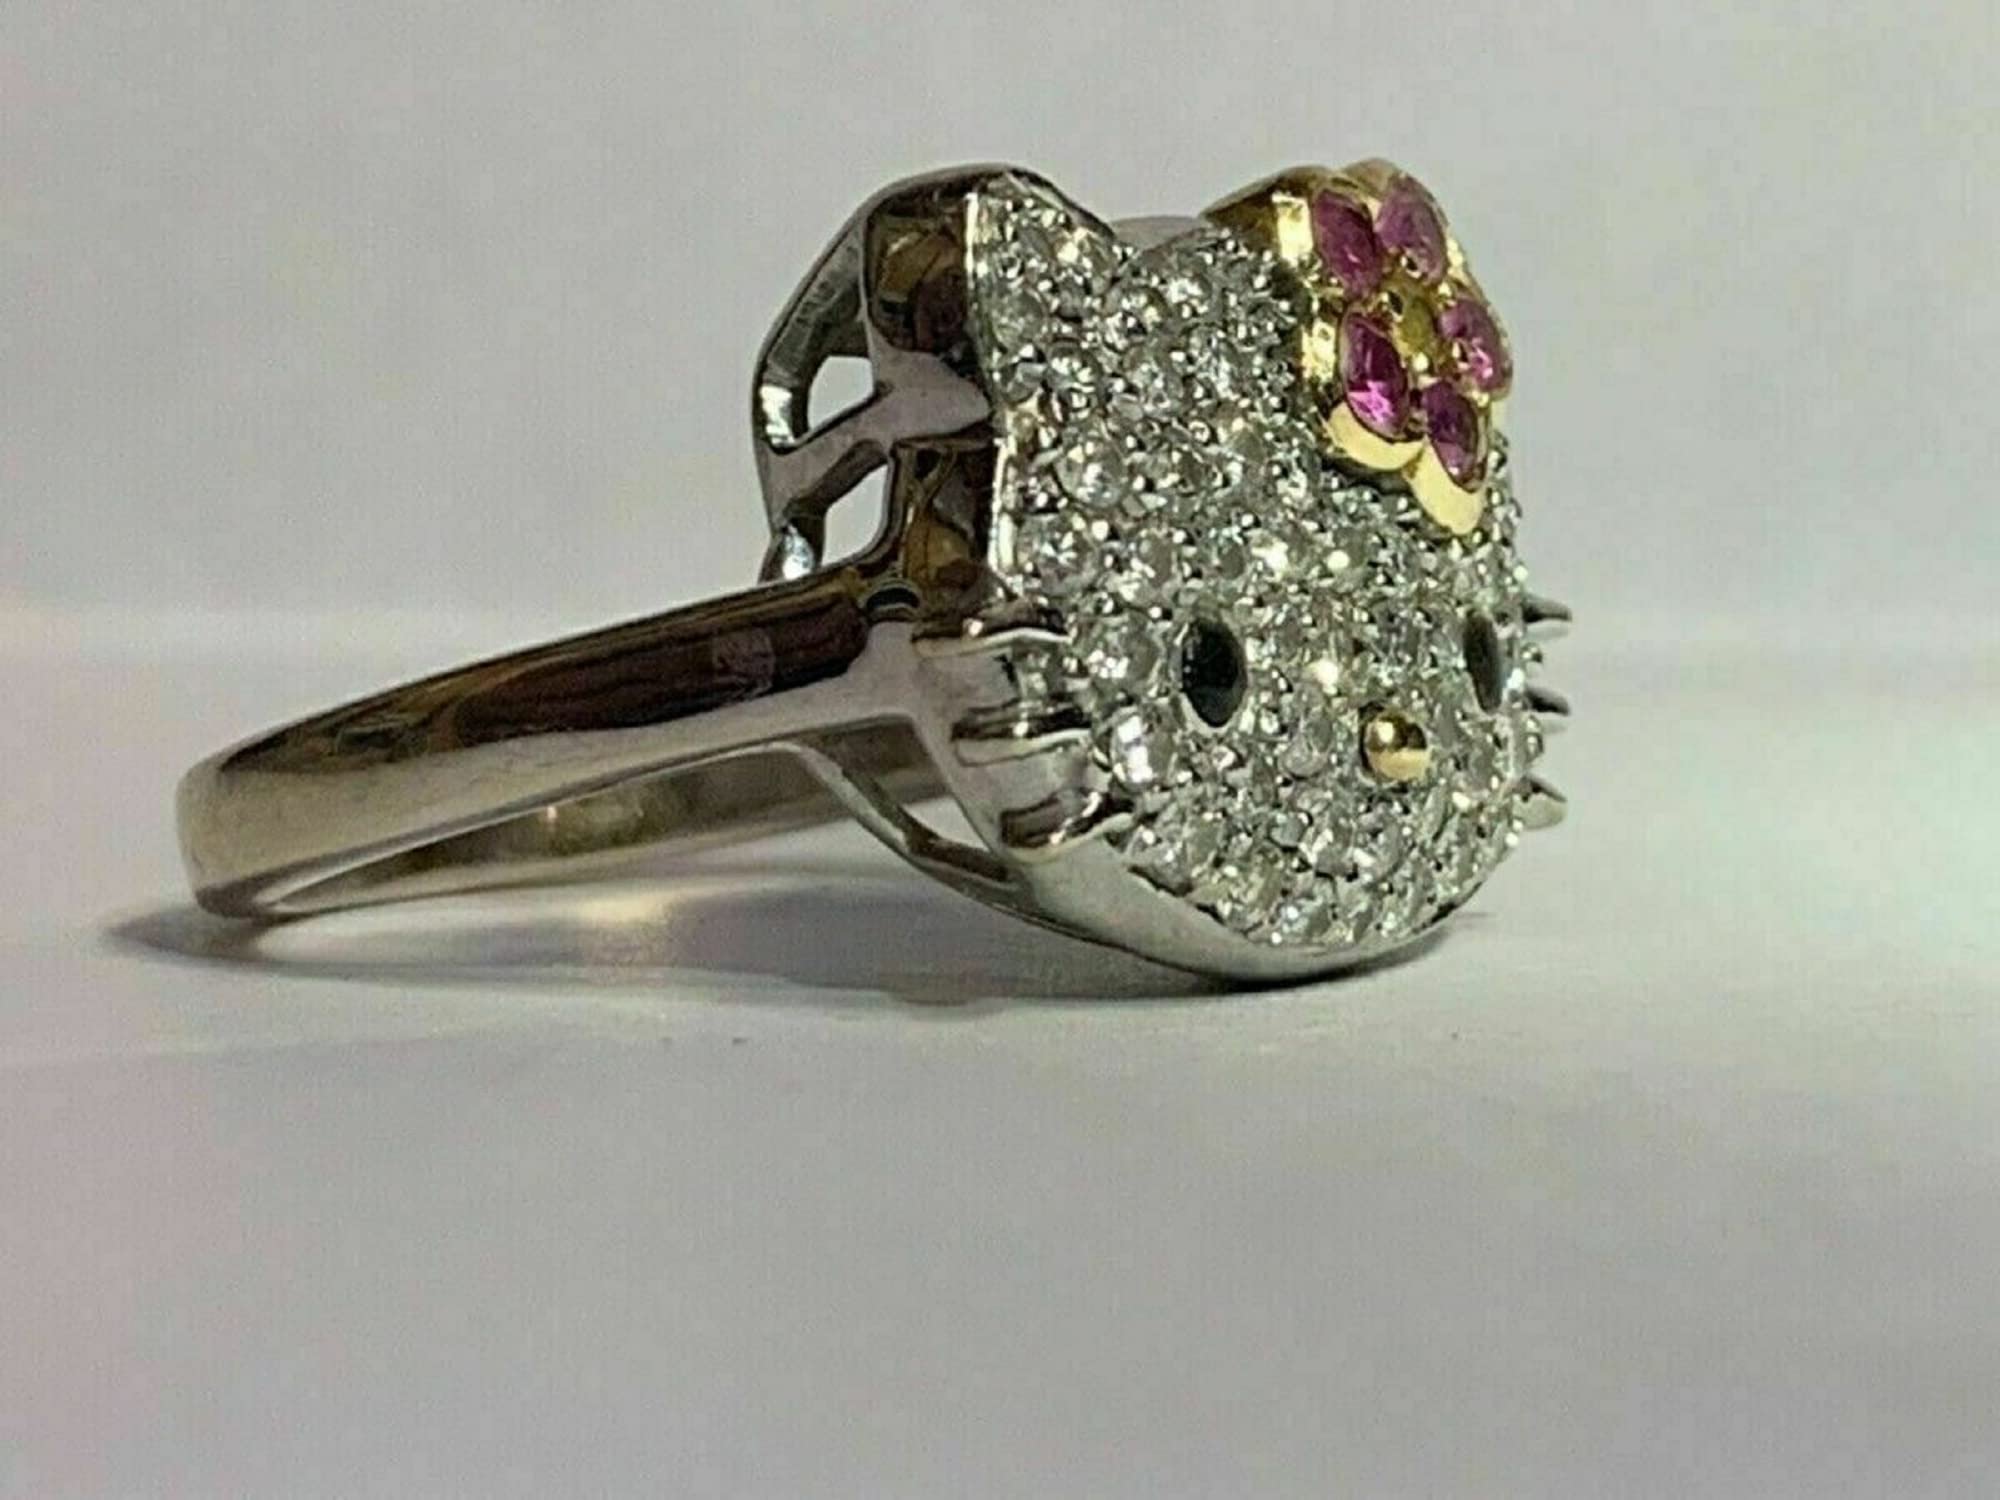 Dazzle Rainbow Jewelry Hello Kitty Diamond Ring /2CT Round Cut Fully Iced Diamond Solid 925 Sterling Silver/Art Deco Ring/Women's Gift Cute Kitty Ring